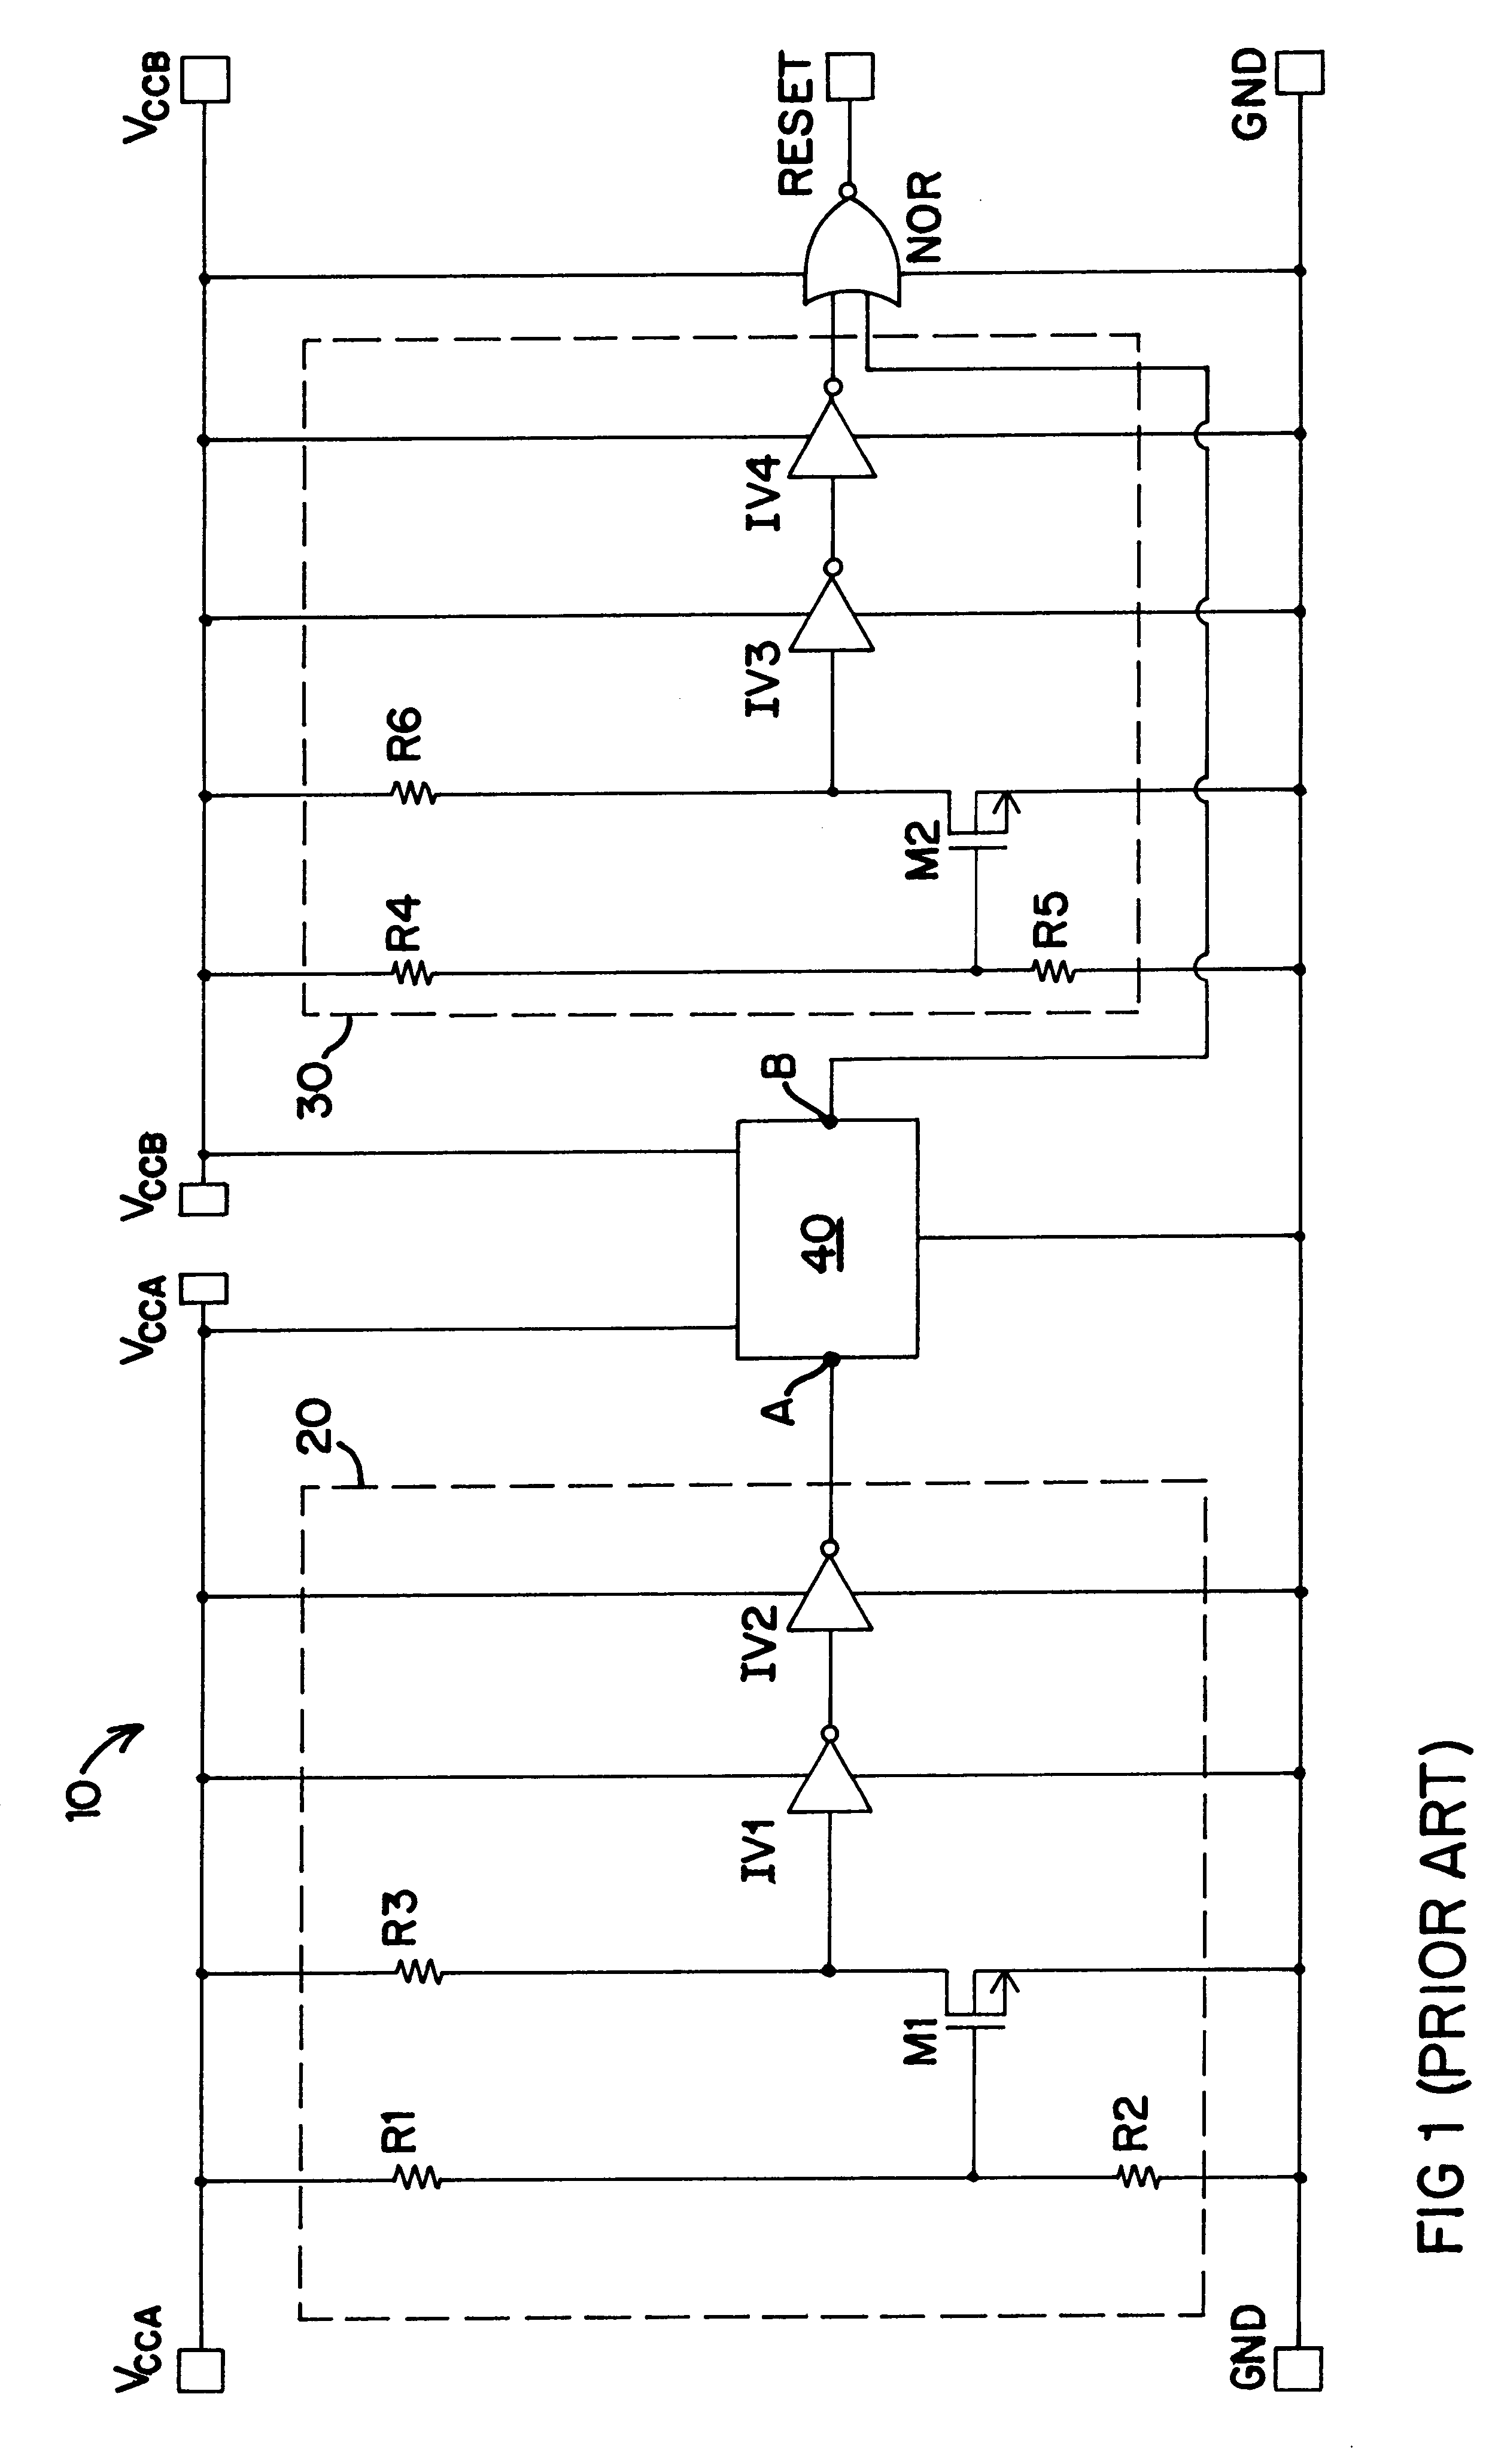 Power-on reset circuit for dual-supply system